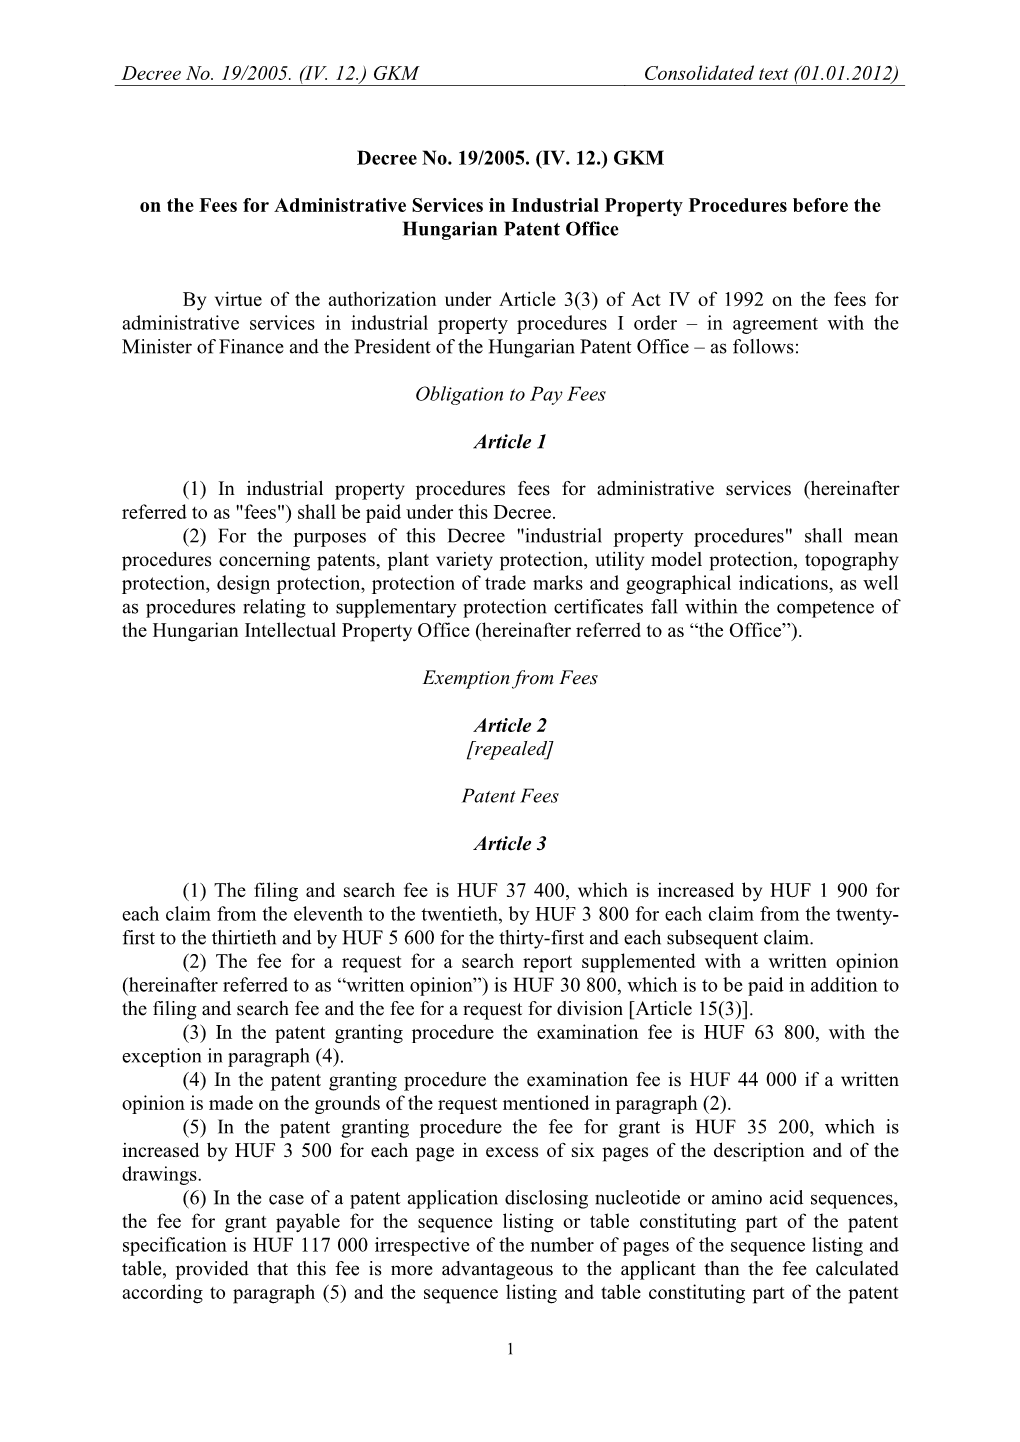 Decree No. 19/2005. (IV. 12.) GKM on the Fees for Administrative Services in Industrial Property Procedures Before the Hungarian Patent Office As Amended by Decree No